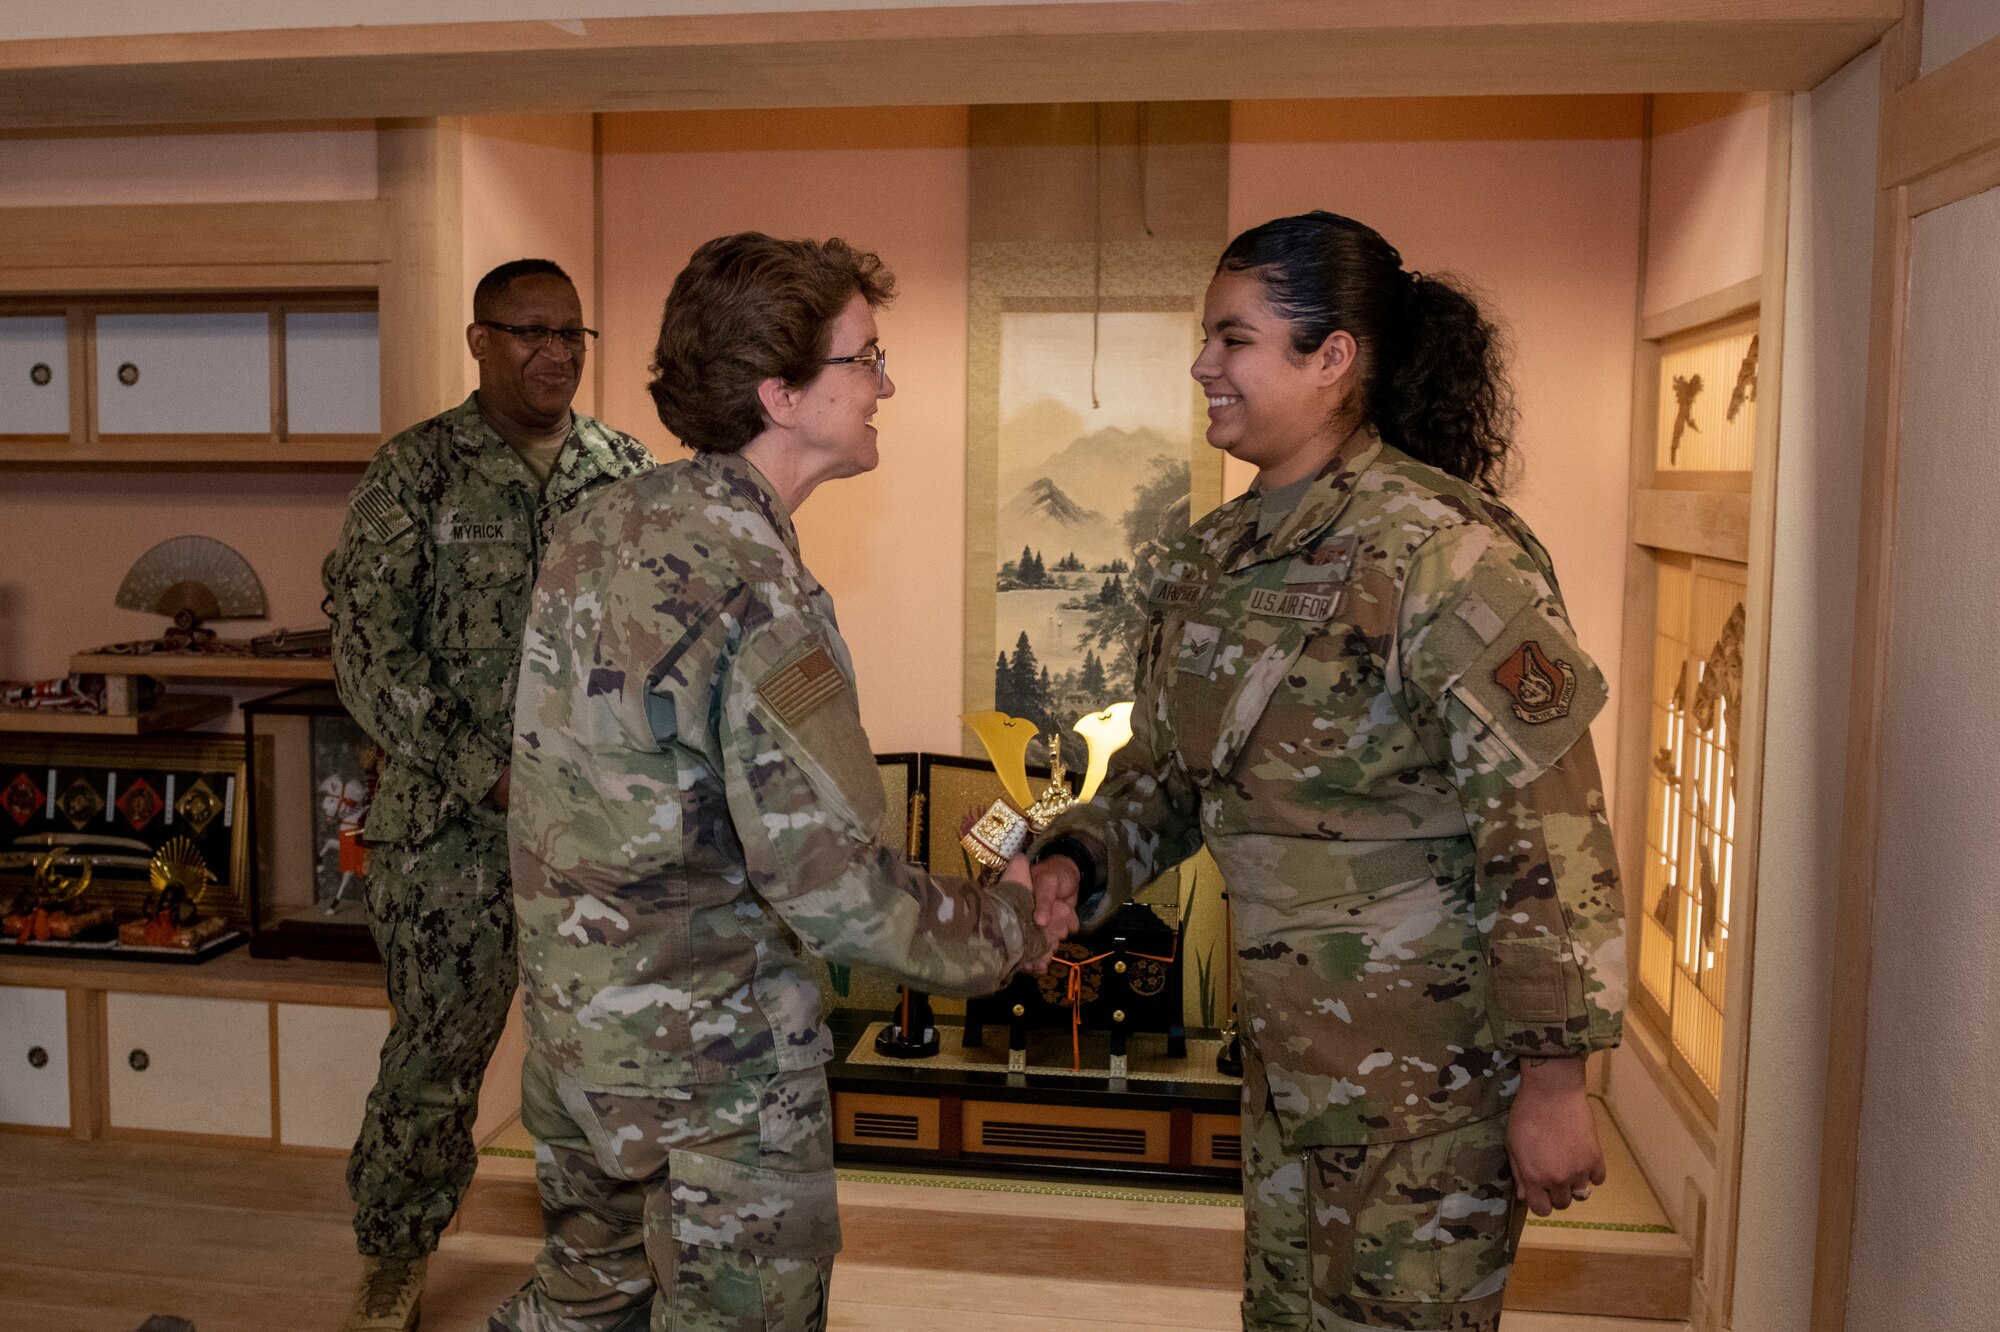 A female general shakes hands with a female Airman